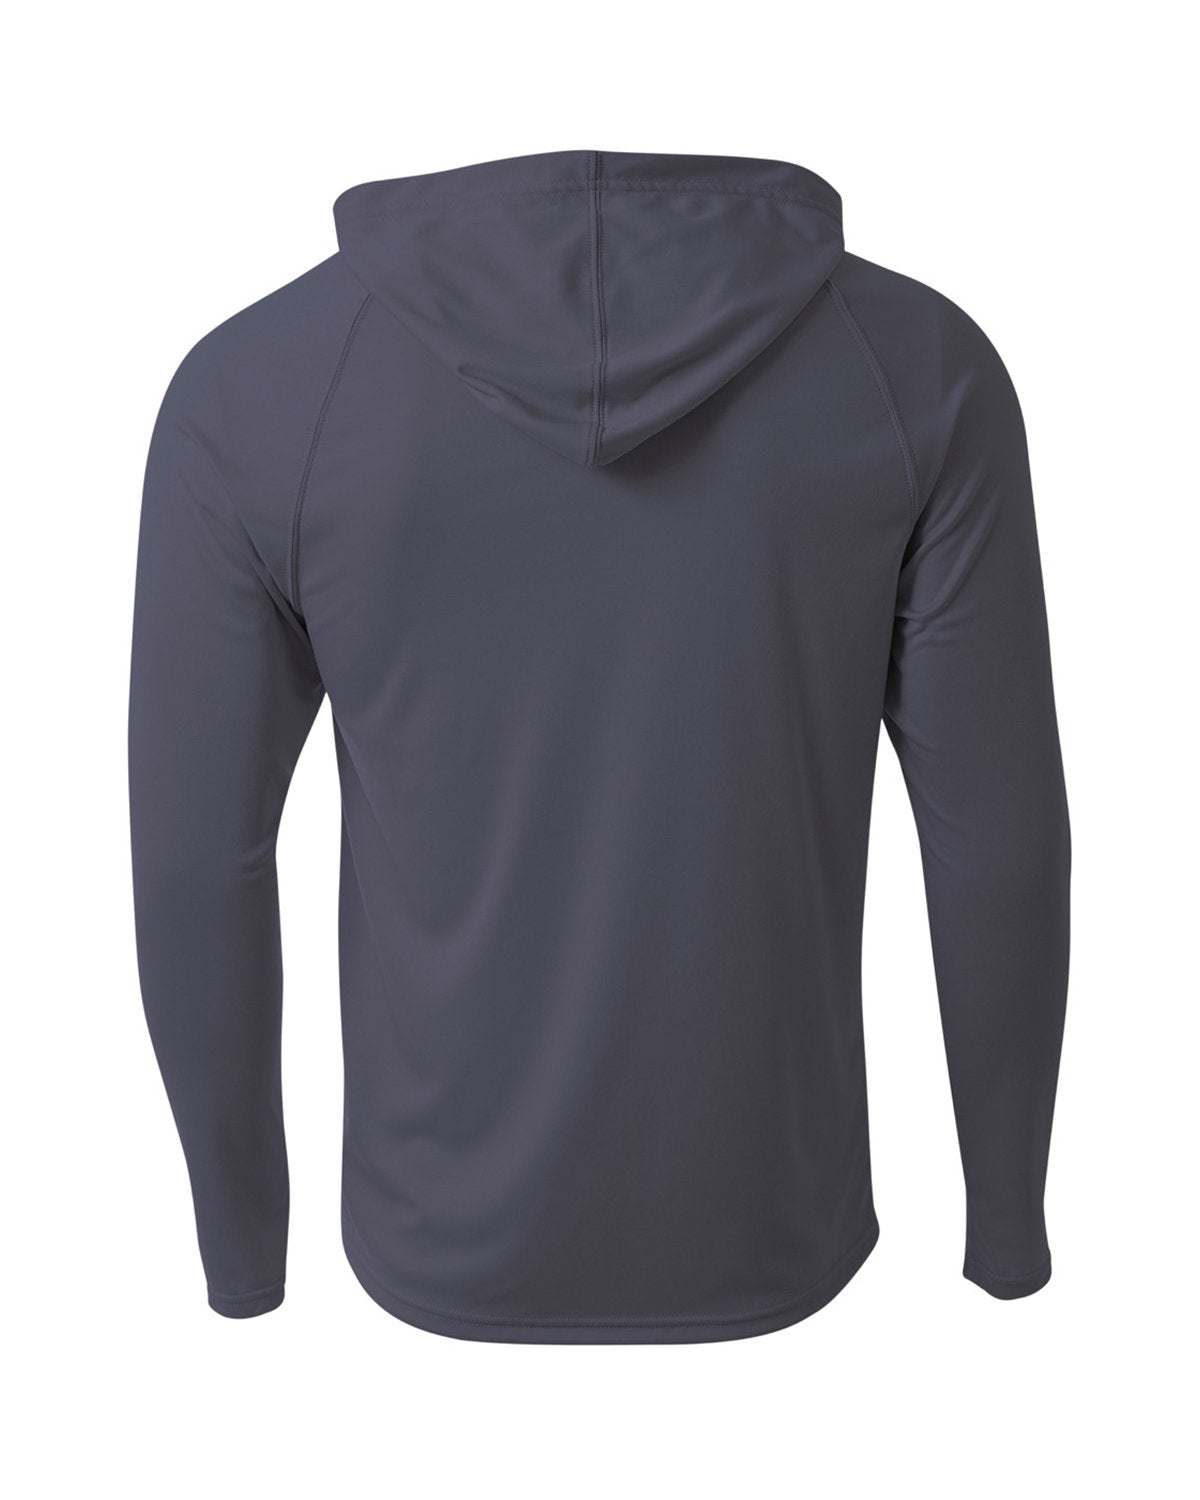 A4 Men's Cooling Performance Hooded T-Shirt